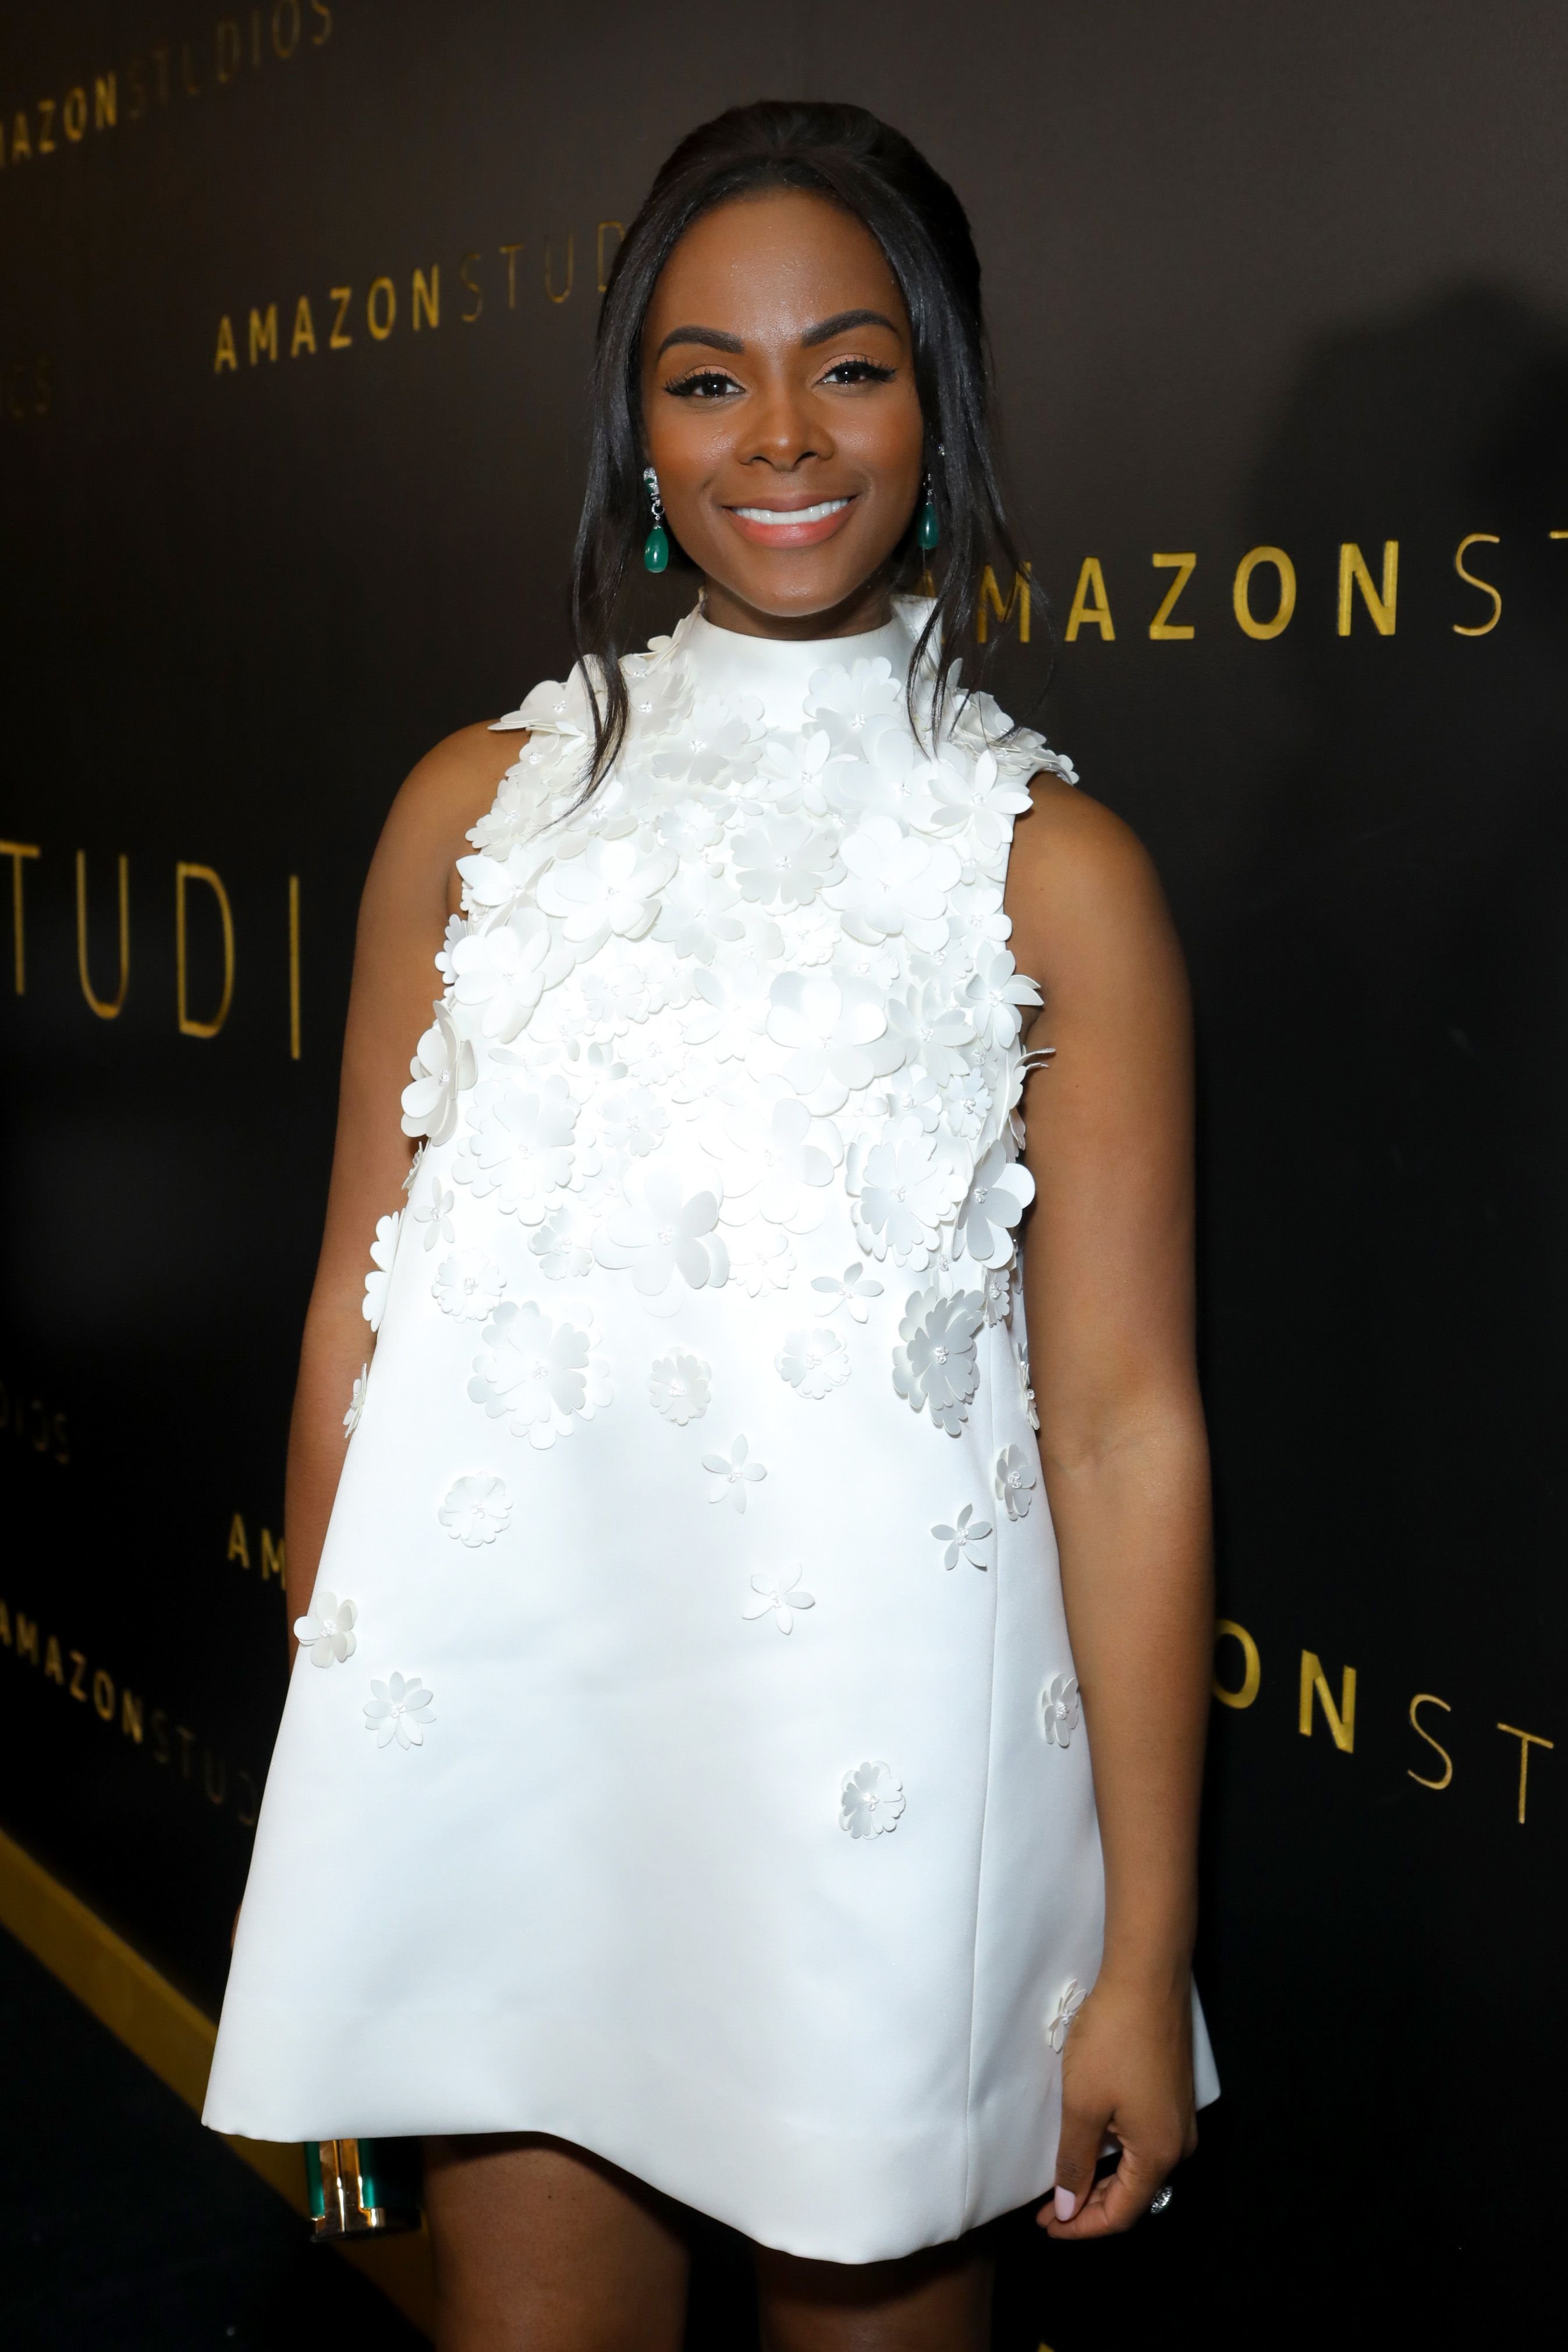 Tika Sumpter at the Amazon Studios Golden Globes After Party on January 5, 2020 in California. | Source: Getty Images